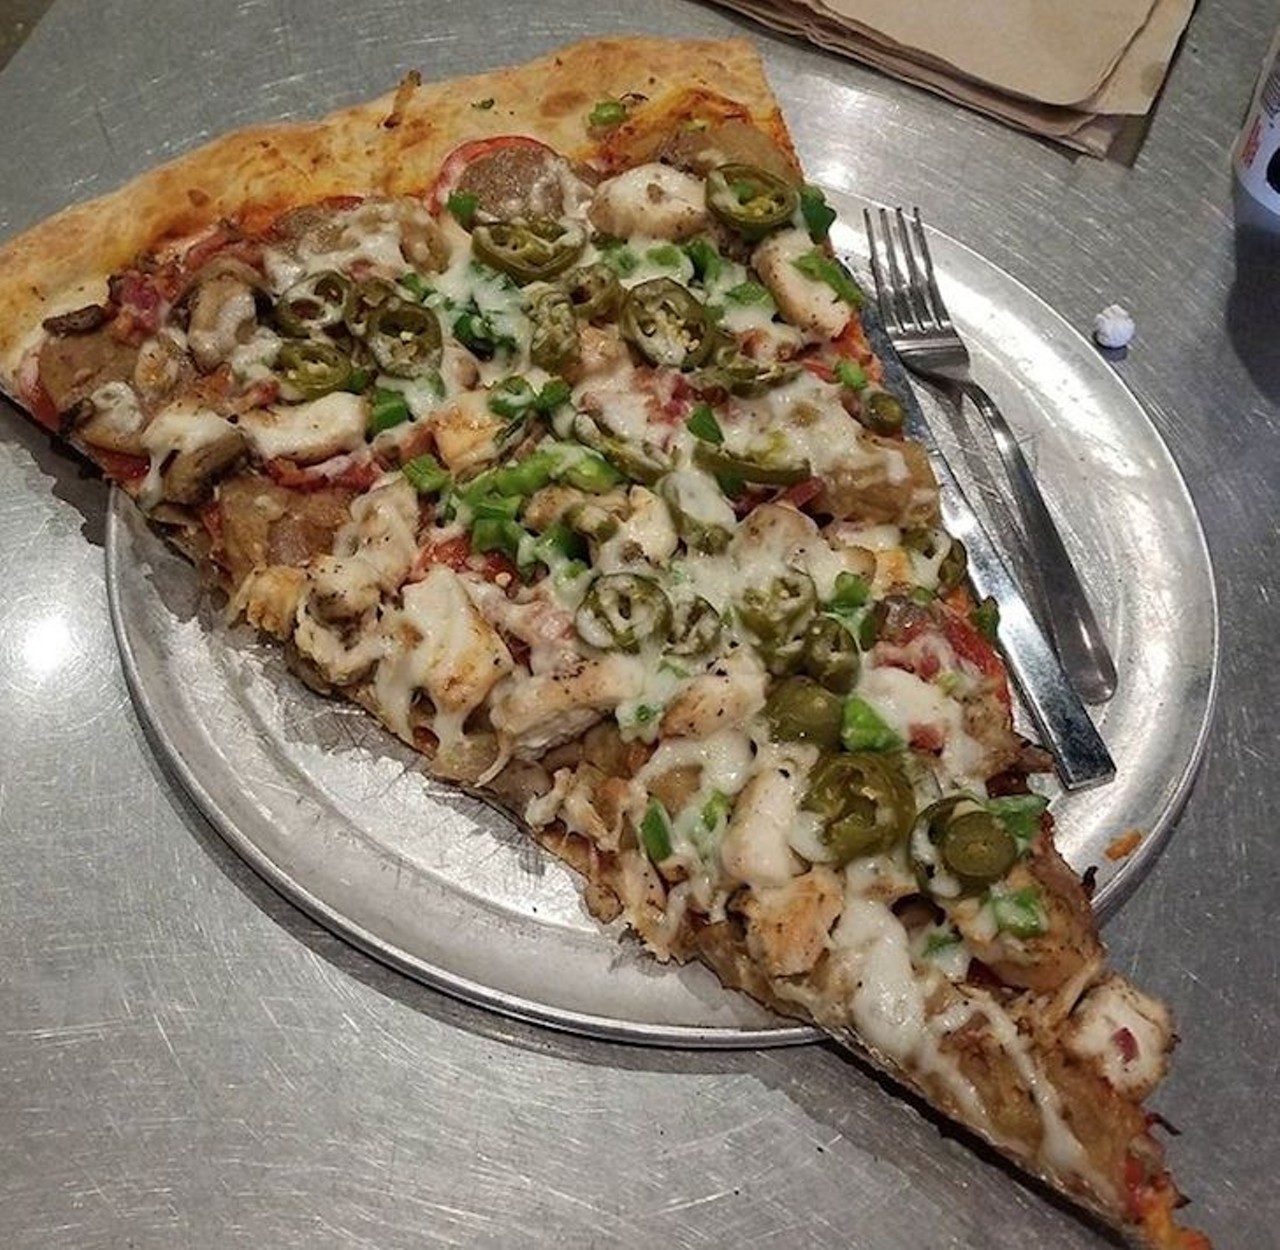 A giant slice of pizza from Lazy Moon 
multiple locations
"Bigger is always better" definitely seems to be the motto at Lazy Moon. Pile on the toppings from their choice of cheeses, fruits, veggies and proteins and you&#146;ve got yourself a nice slice.
Photo via bdeliz/Instagram